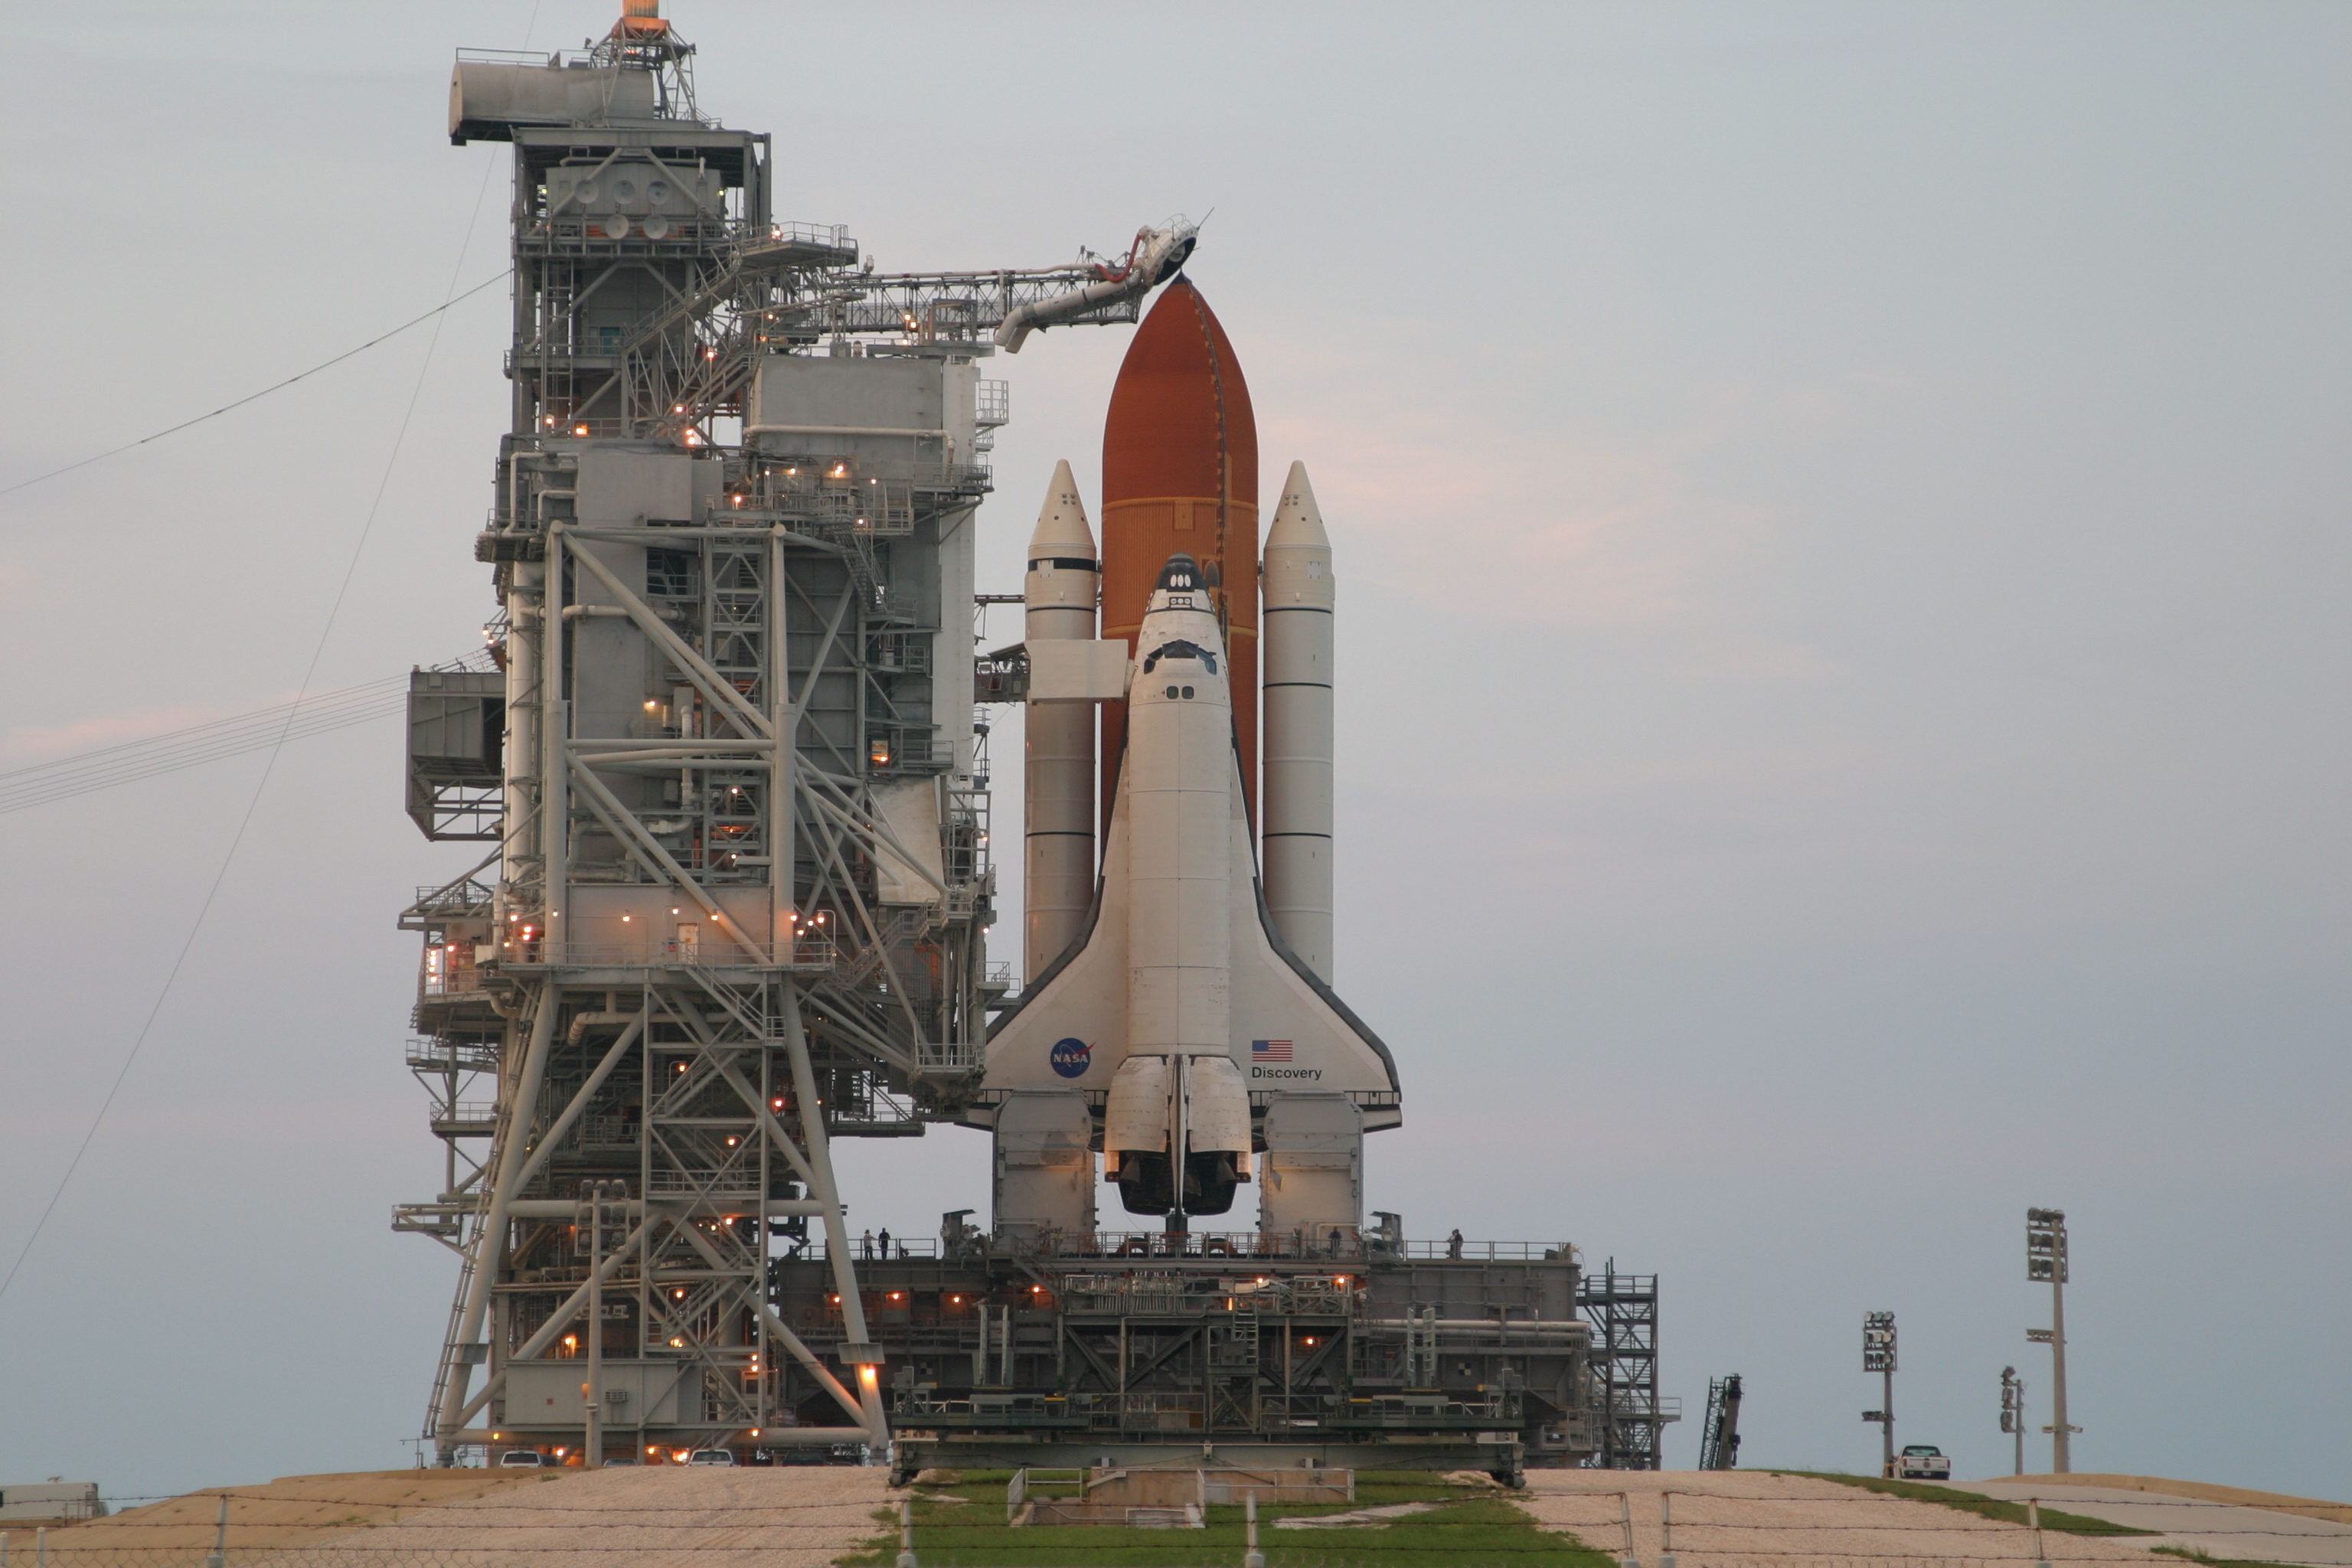 Space in Images - 2006 - 07 - Space Shuttle Discovery stands ready ...